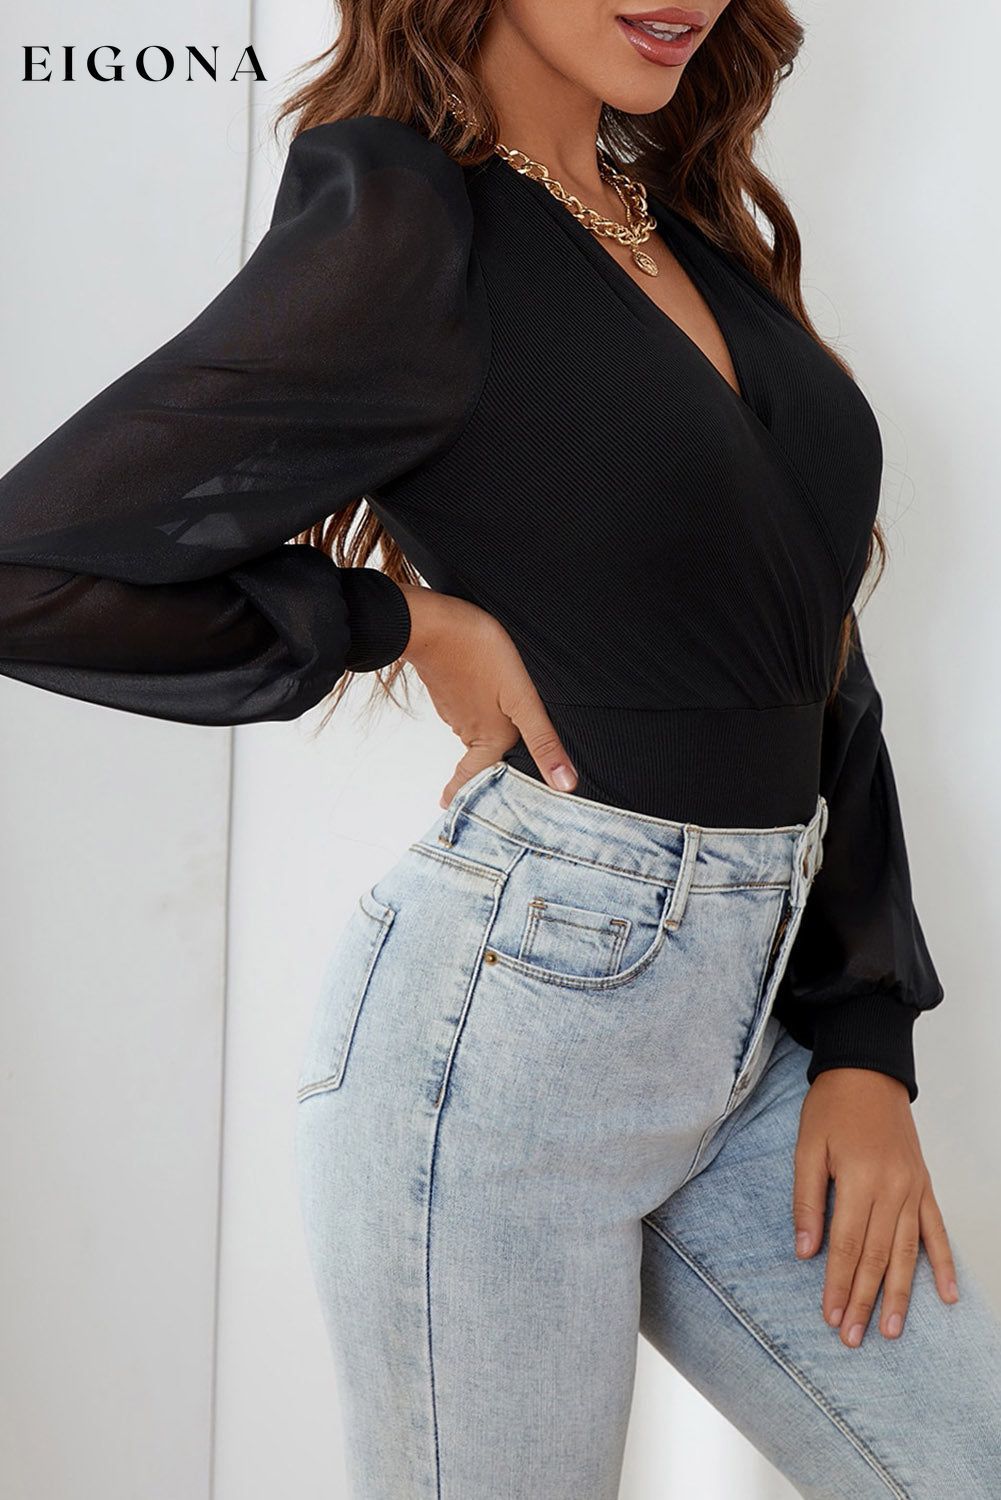 Black Solid Color V Neck Wrap Mesh Sleeves Long Sleeve Shirt, Bodysuit bodysuit bodysuits clothes long sleeve shirt long sleeve shirts long sleeve top long sleeve tops Occasion Daily Print Solid Color Season Fall & Autumn shirt shirts Style Elegant top tops